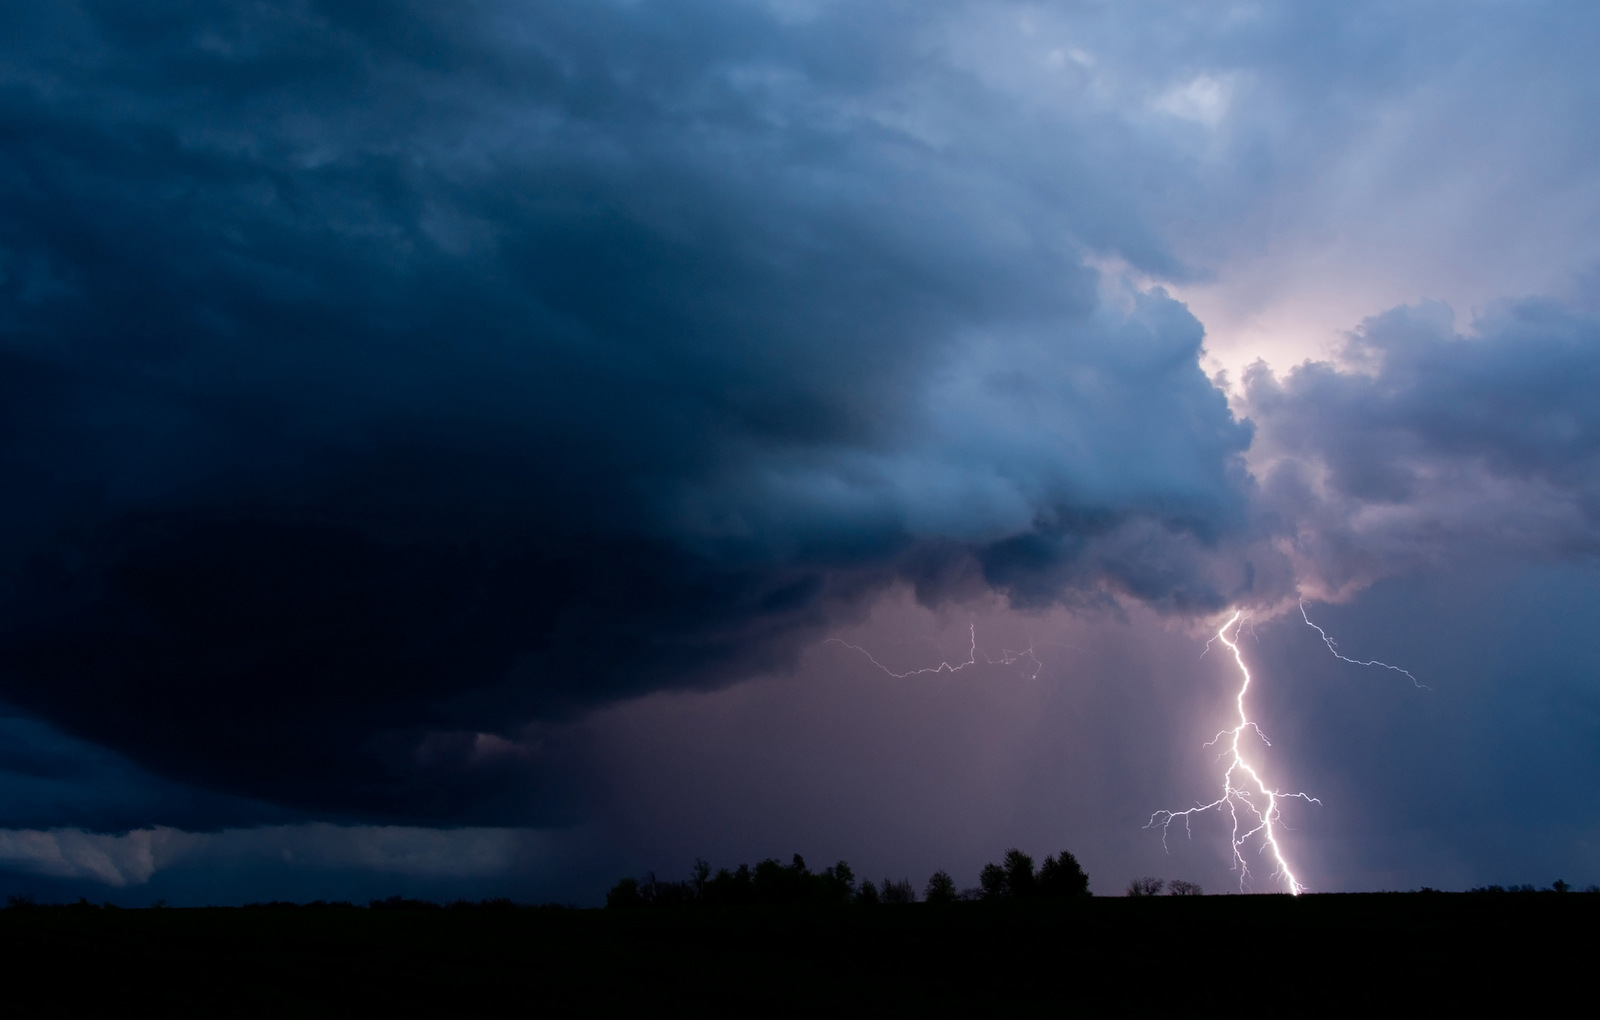 The Met department warns thunderstorms with lightning from April 9 to 11.